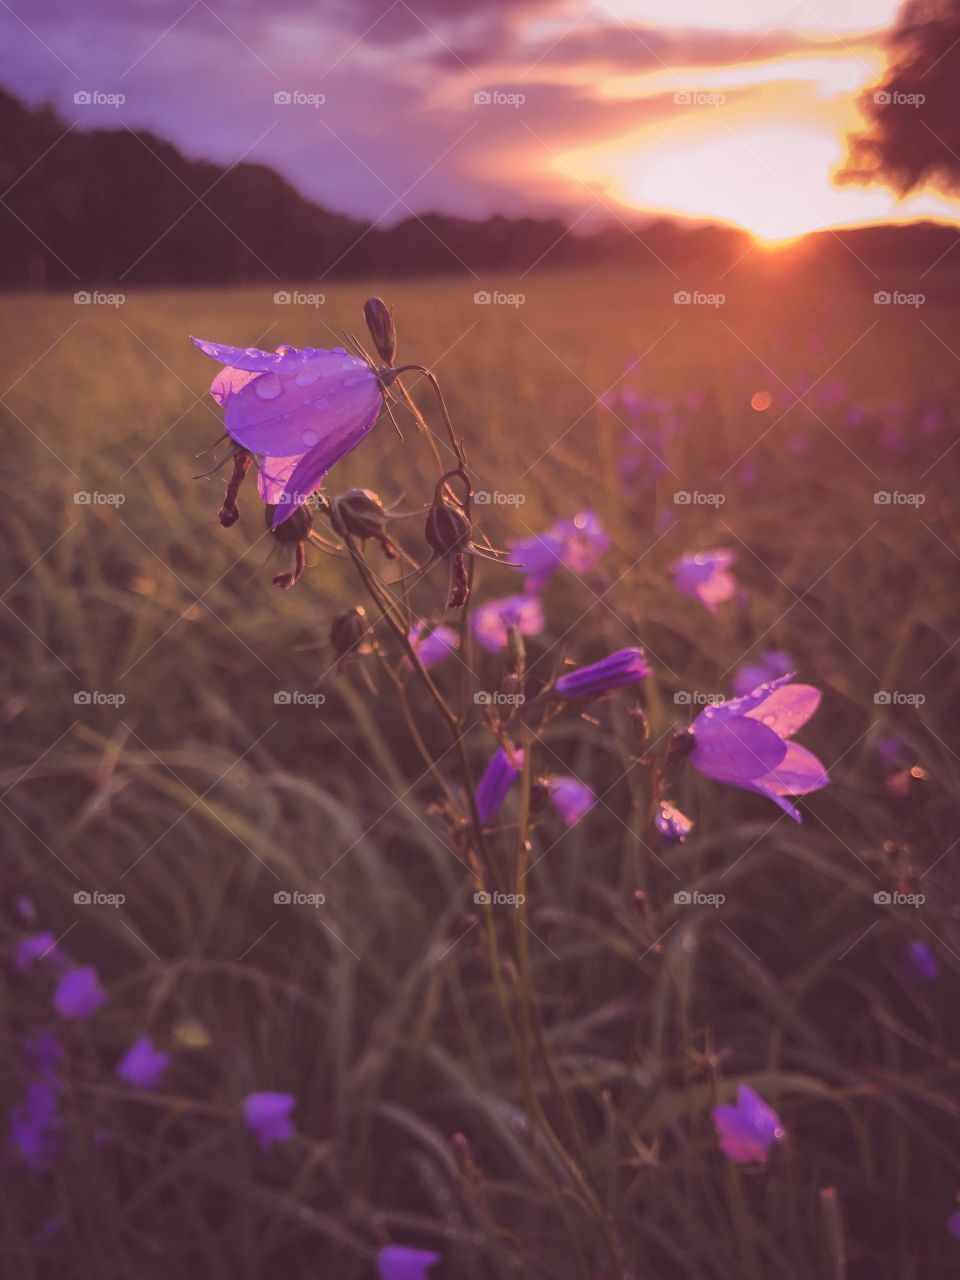 Purple meadow Flowers at Sunset 